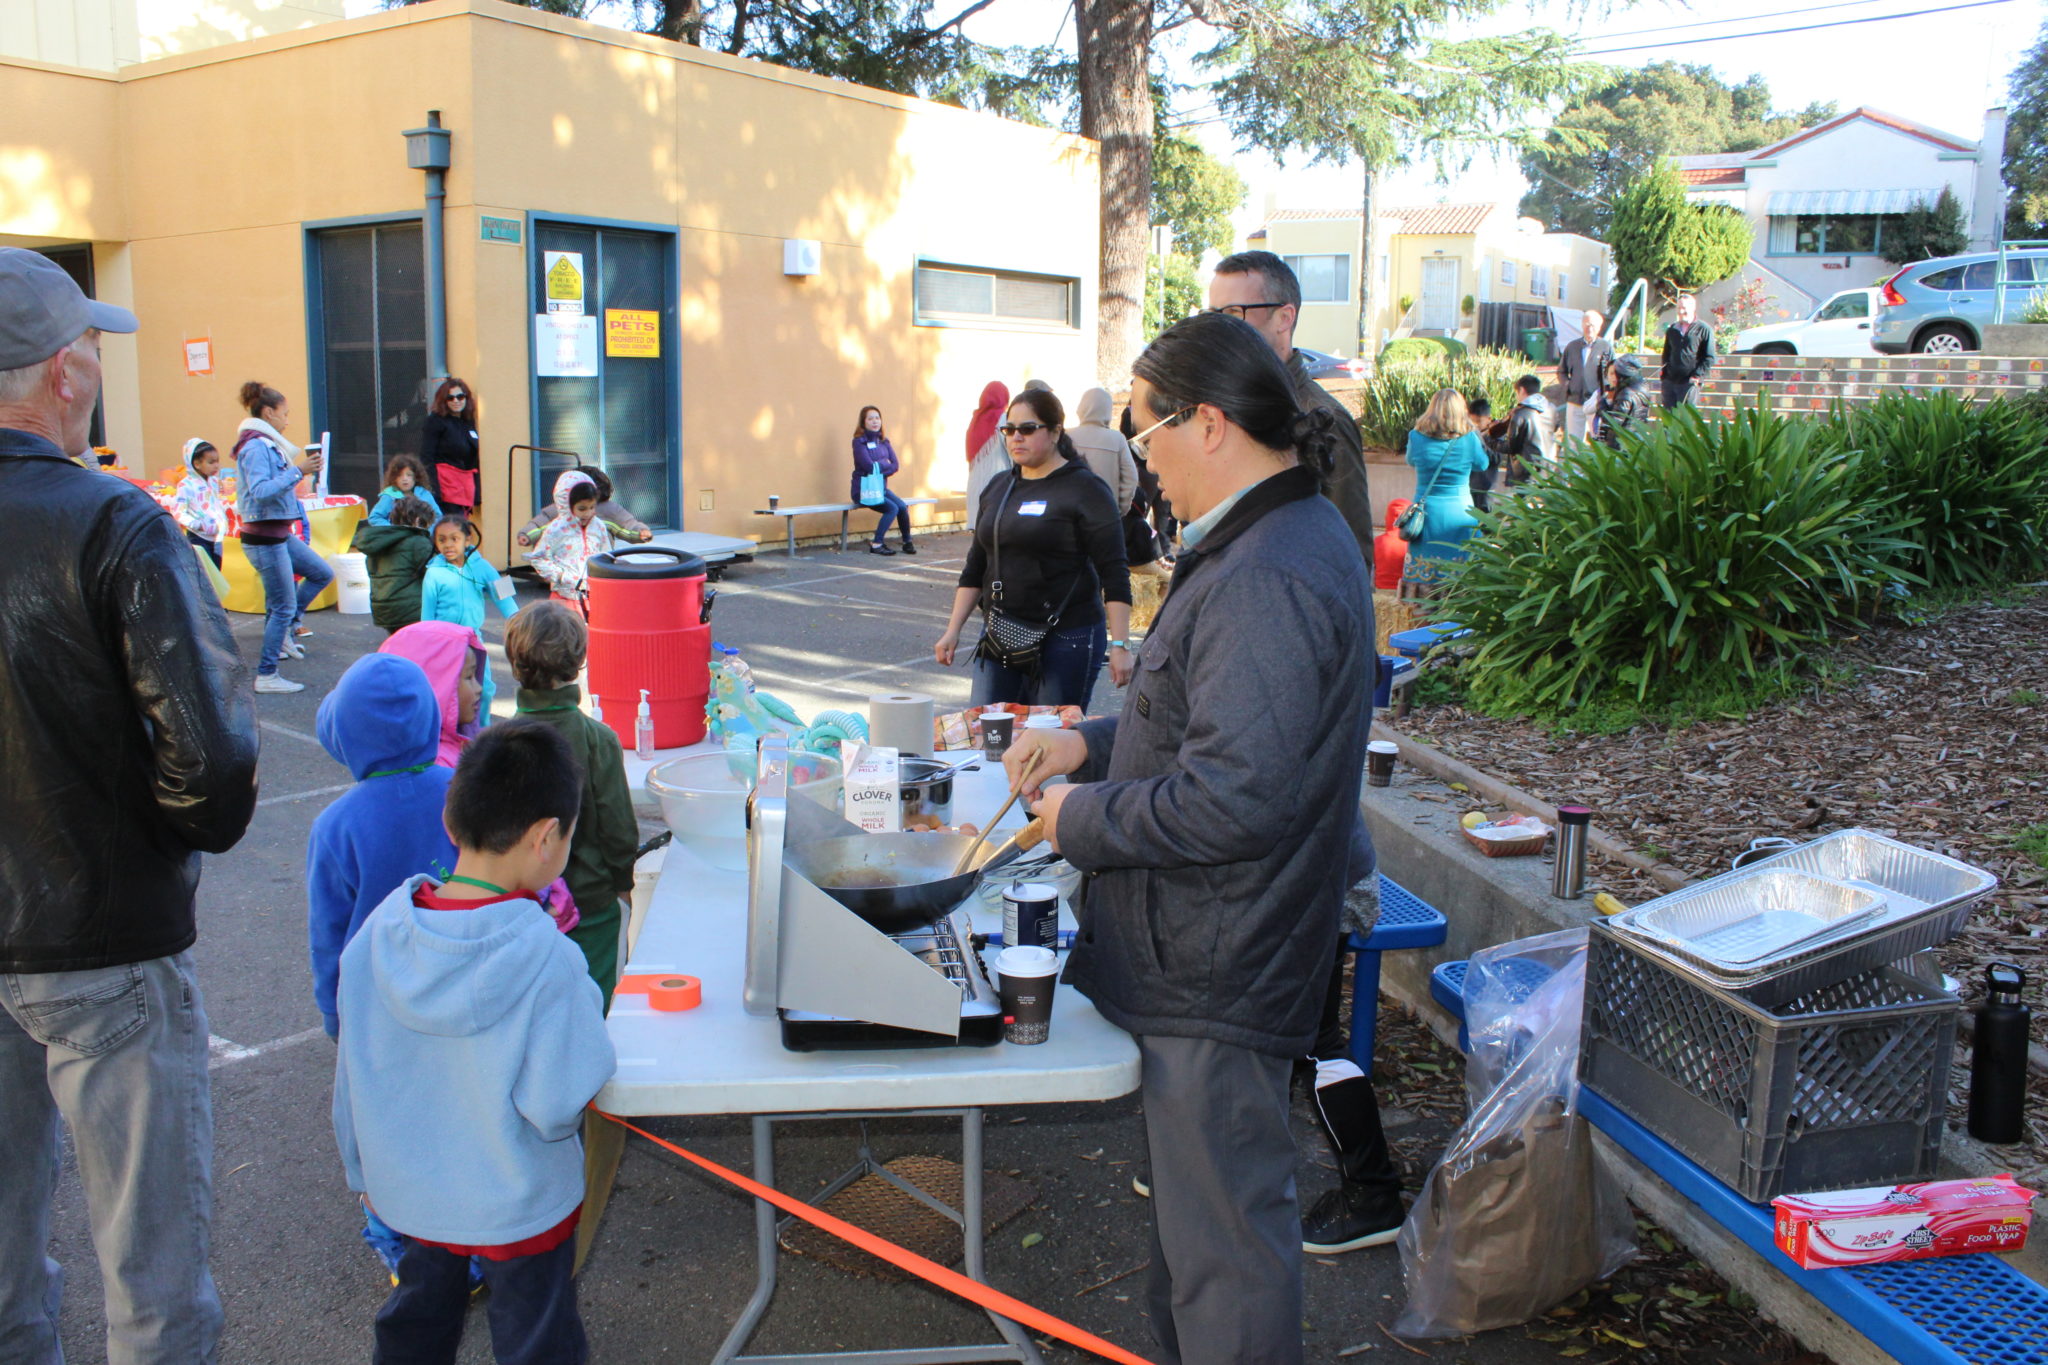 A volunteer cooks food in a pan while kids watch.